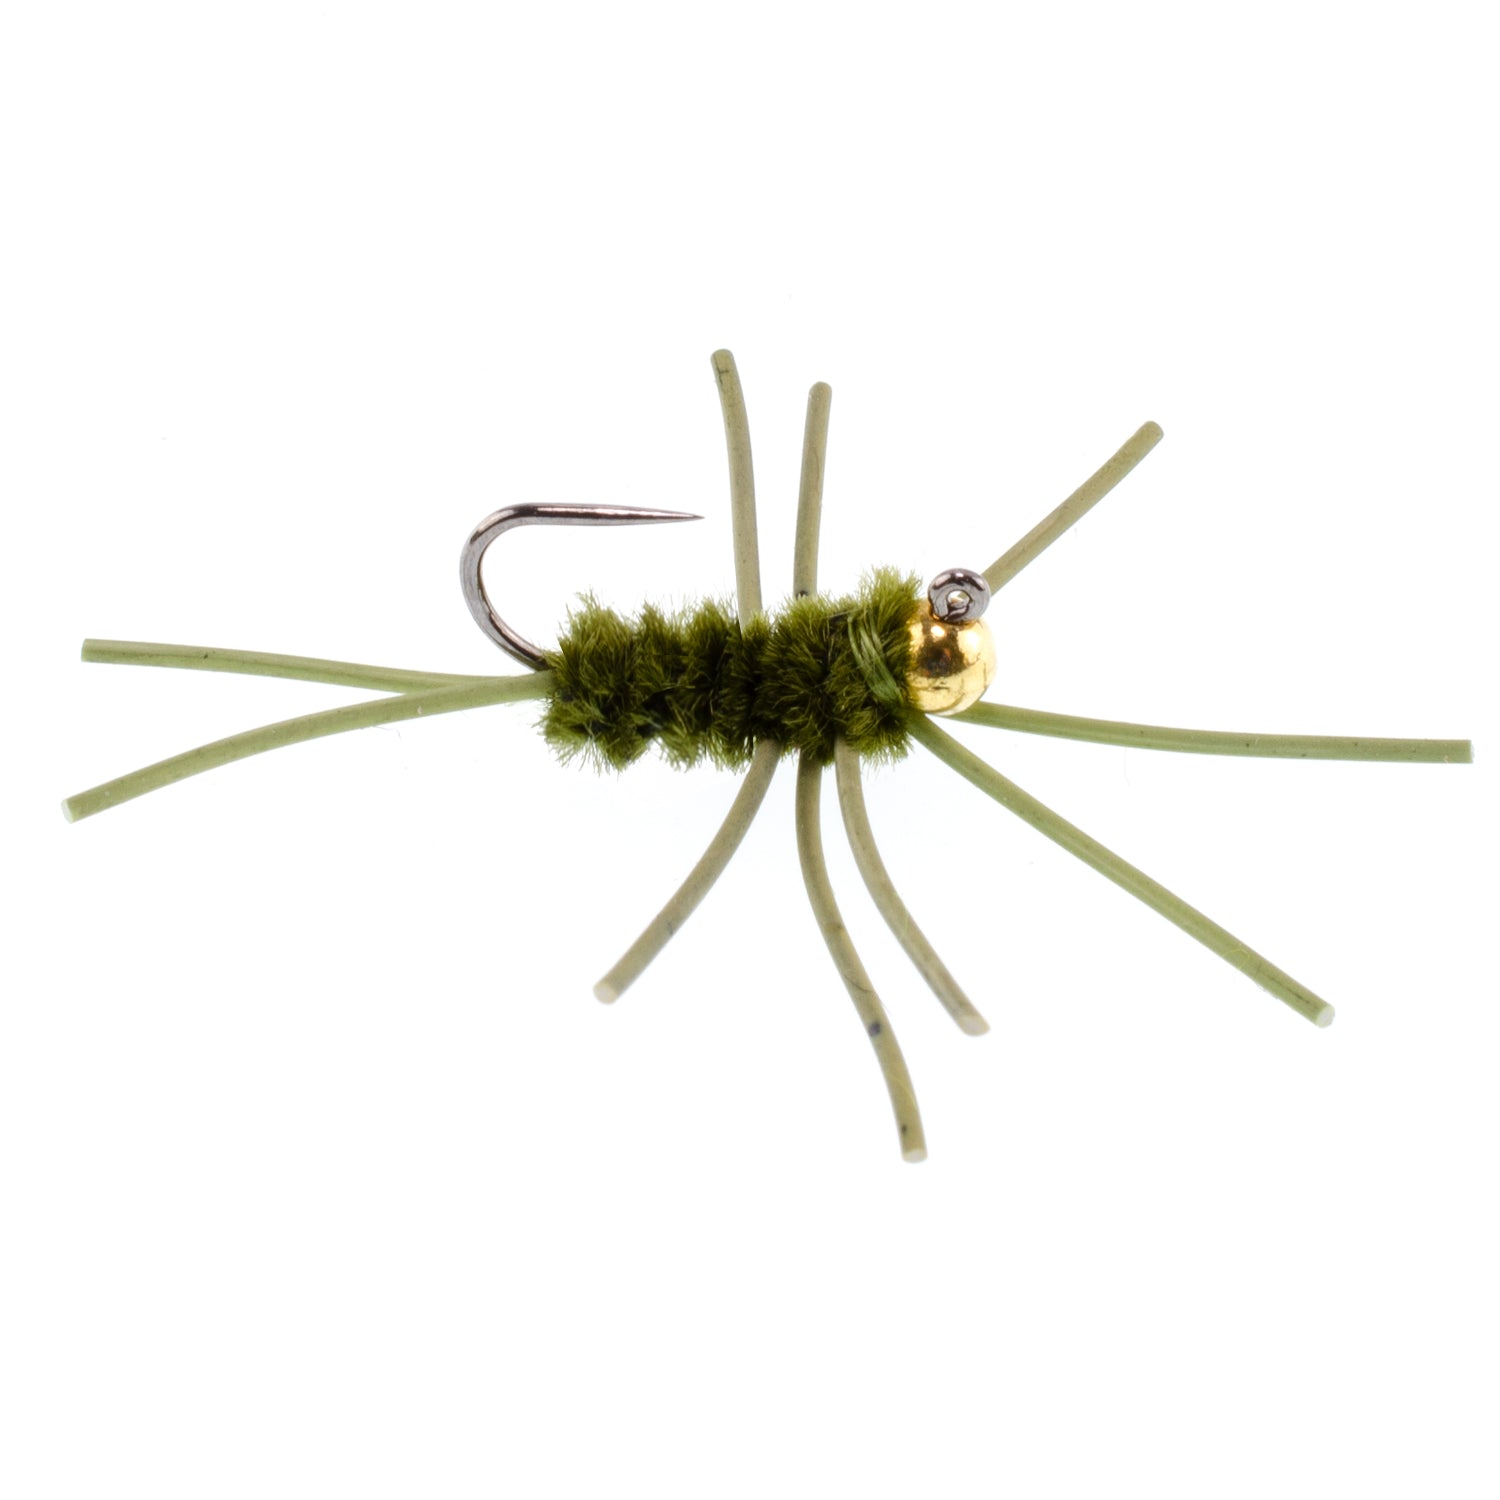 Tungsten Bead Jigged Pat's Rubber Legs Nymph Assortment Fly Fishing Flies - Trout and Bass Wet Fly Pattern - 14 Flies 7 Colors Hook Size 10